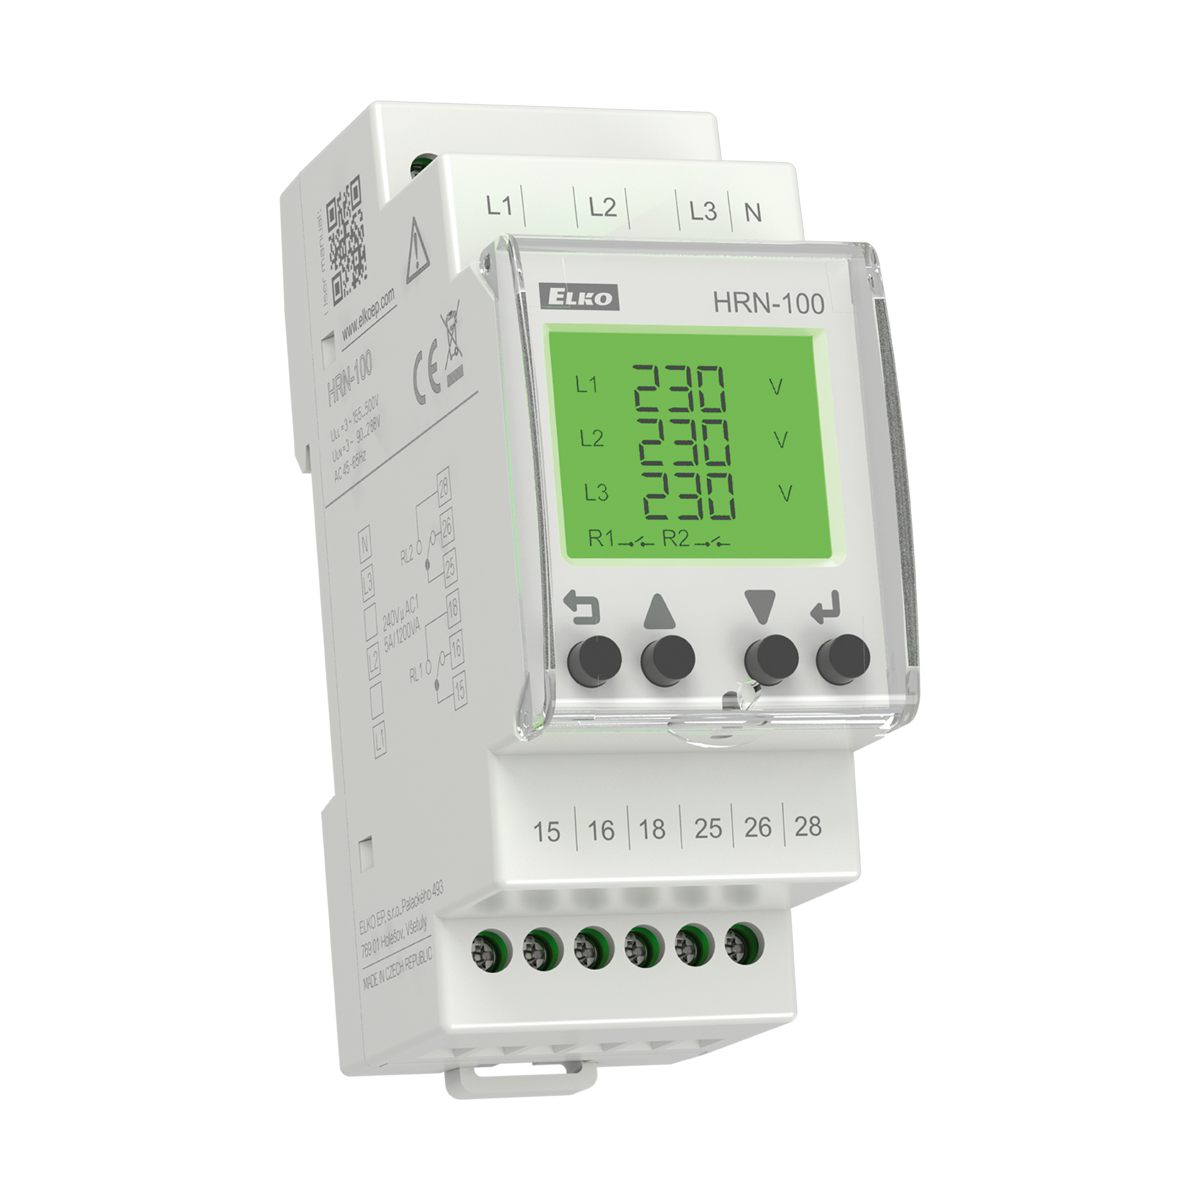 Multifunction voltage monitoring relay